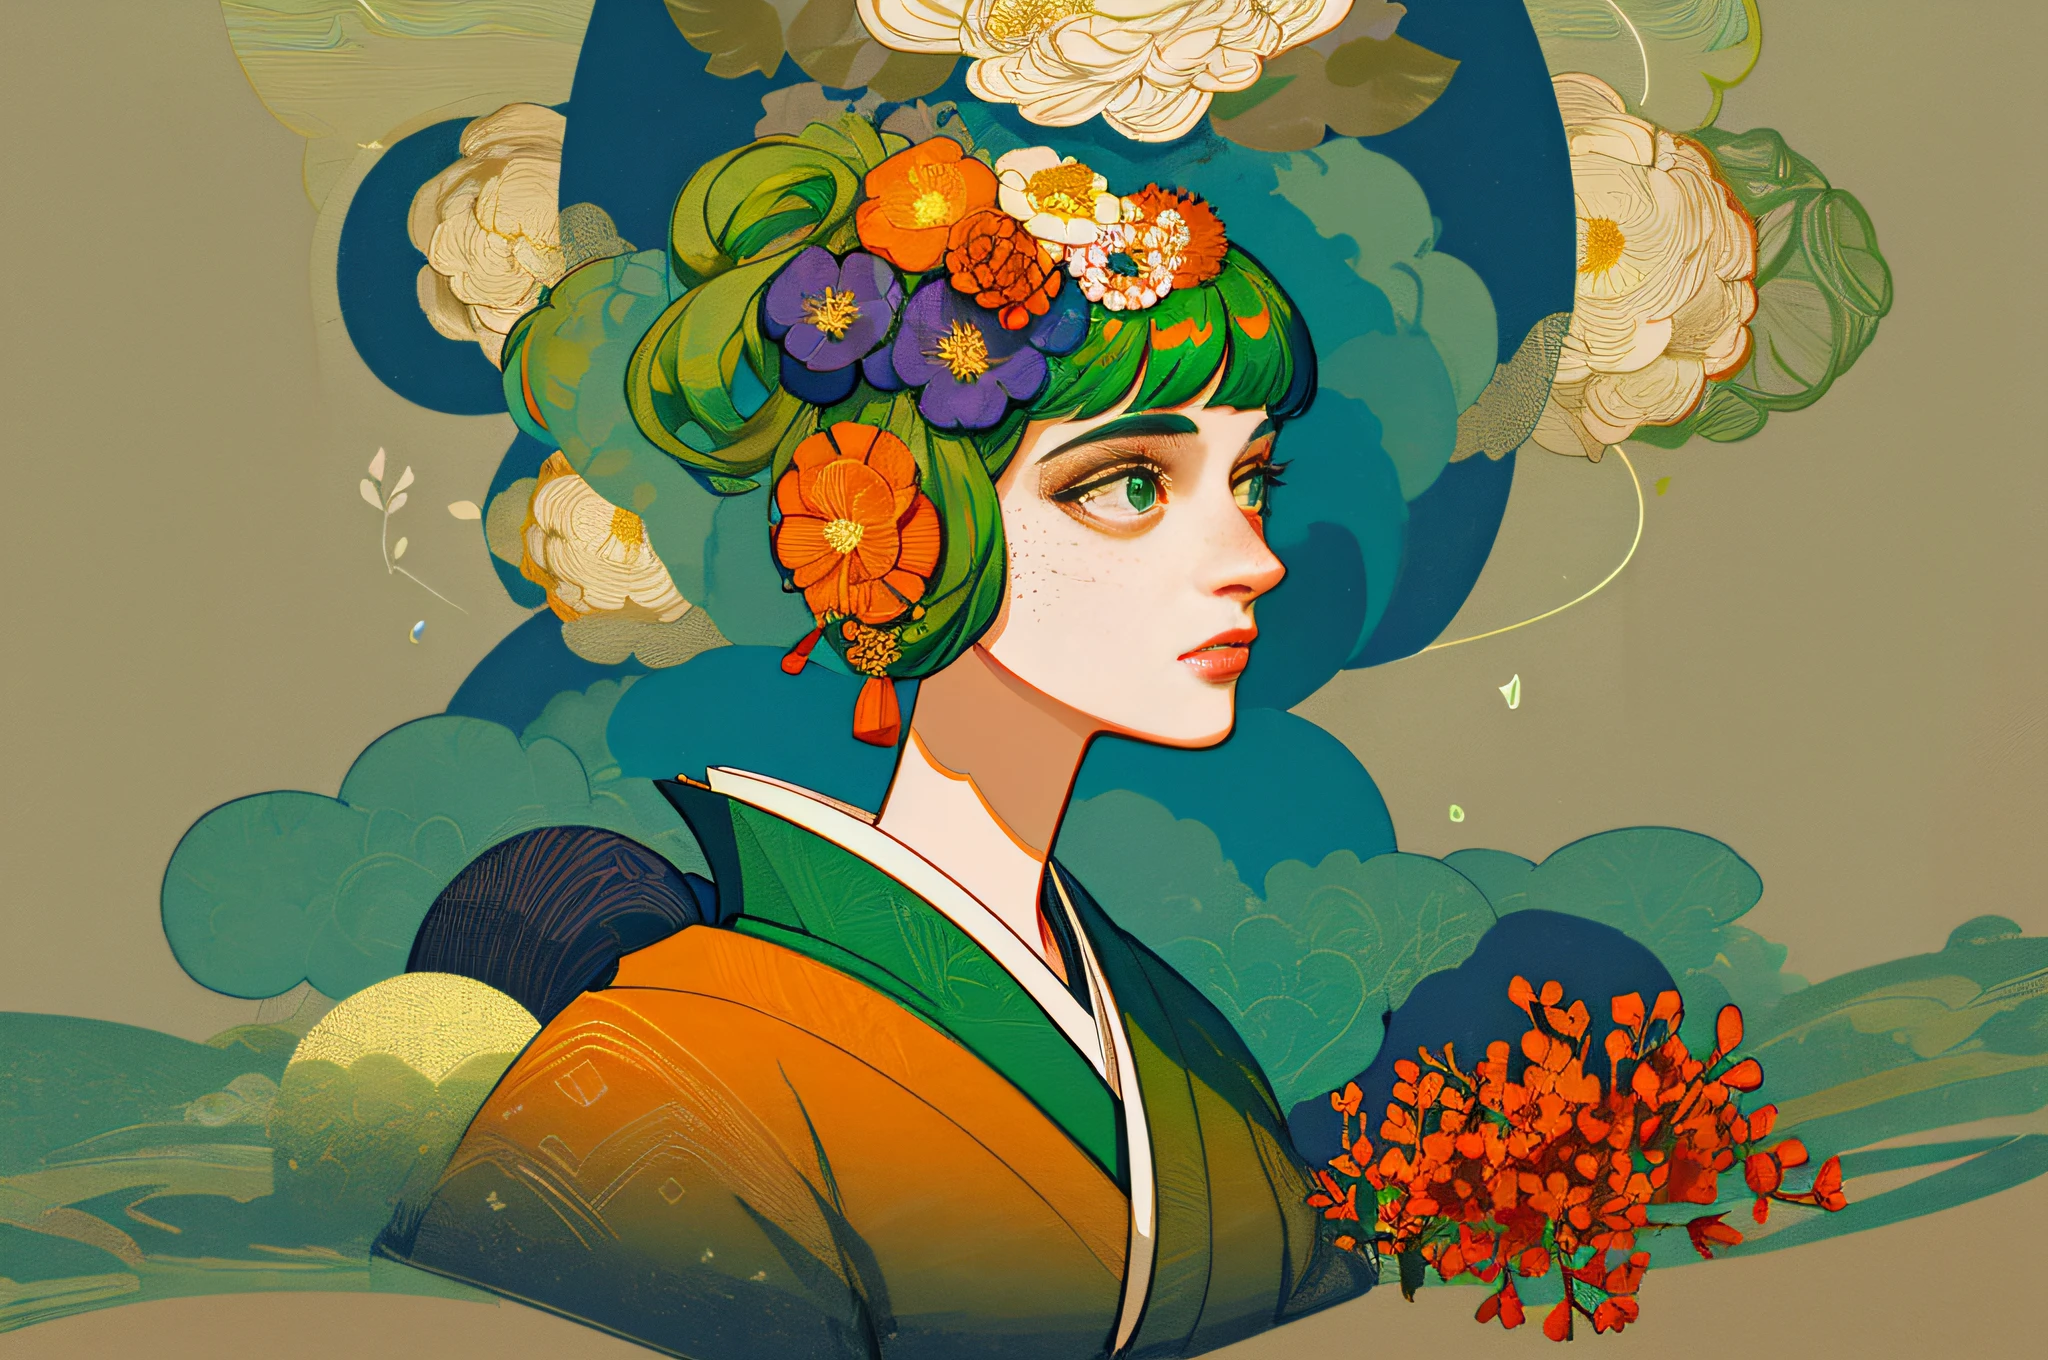 (Masterpiece)), ((Ultra Detailed)), (Best Quality)), Beautiful Detailed Eyes, Detailed Face, Best Lighting, Best Shadows, 1 Front Bust Girl, Solo, ((Classic Disney Style, Edge Lighting, Flat 2D Style, Disney 2D)), ((The main colors are orange and green)), Huge flowers, (Girl inside the flowers:1.5), Botanical Island,Botanical Paradise, World Made of Flowers, Freckles, Cold Nose, (((Flowers)), Japanese Inspiration, (highly detailed), vortex effect, A3,